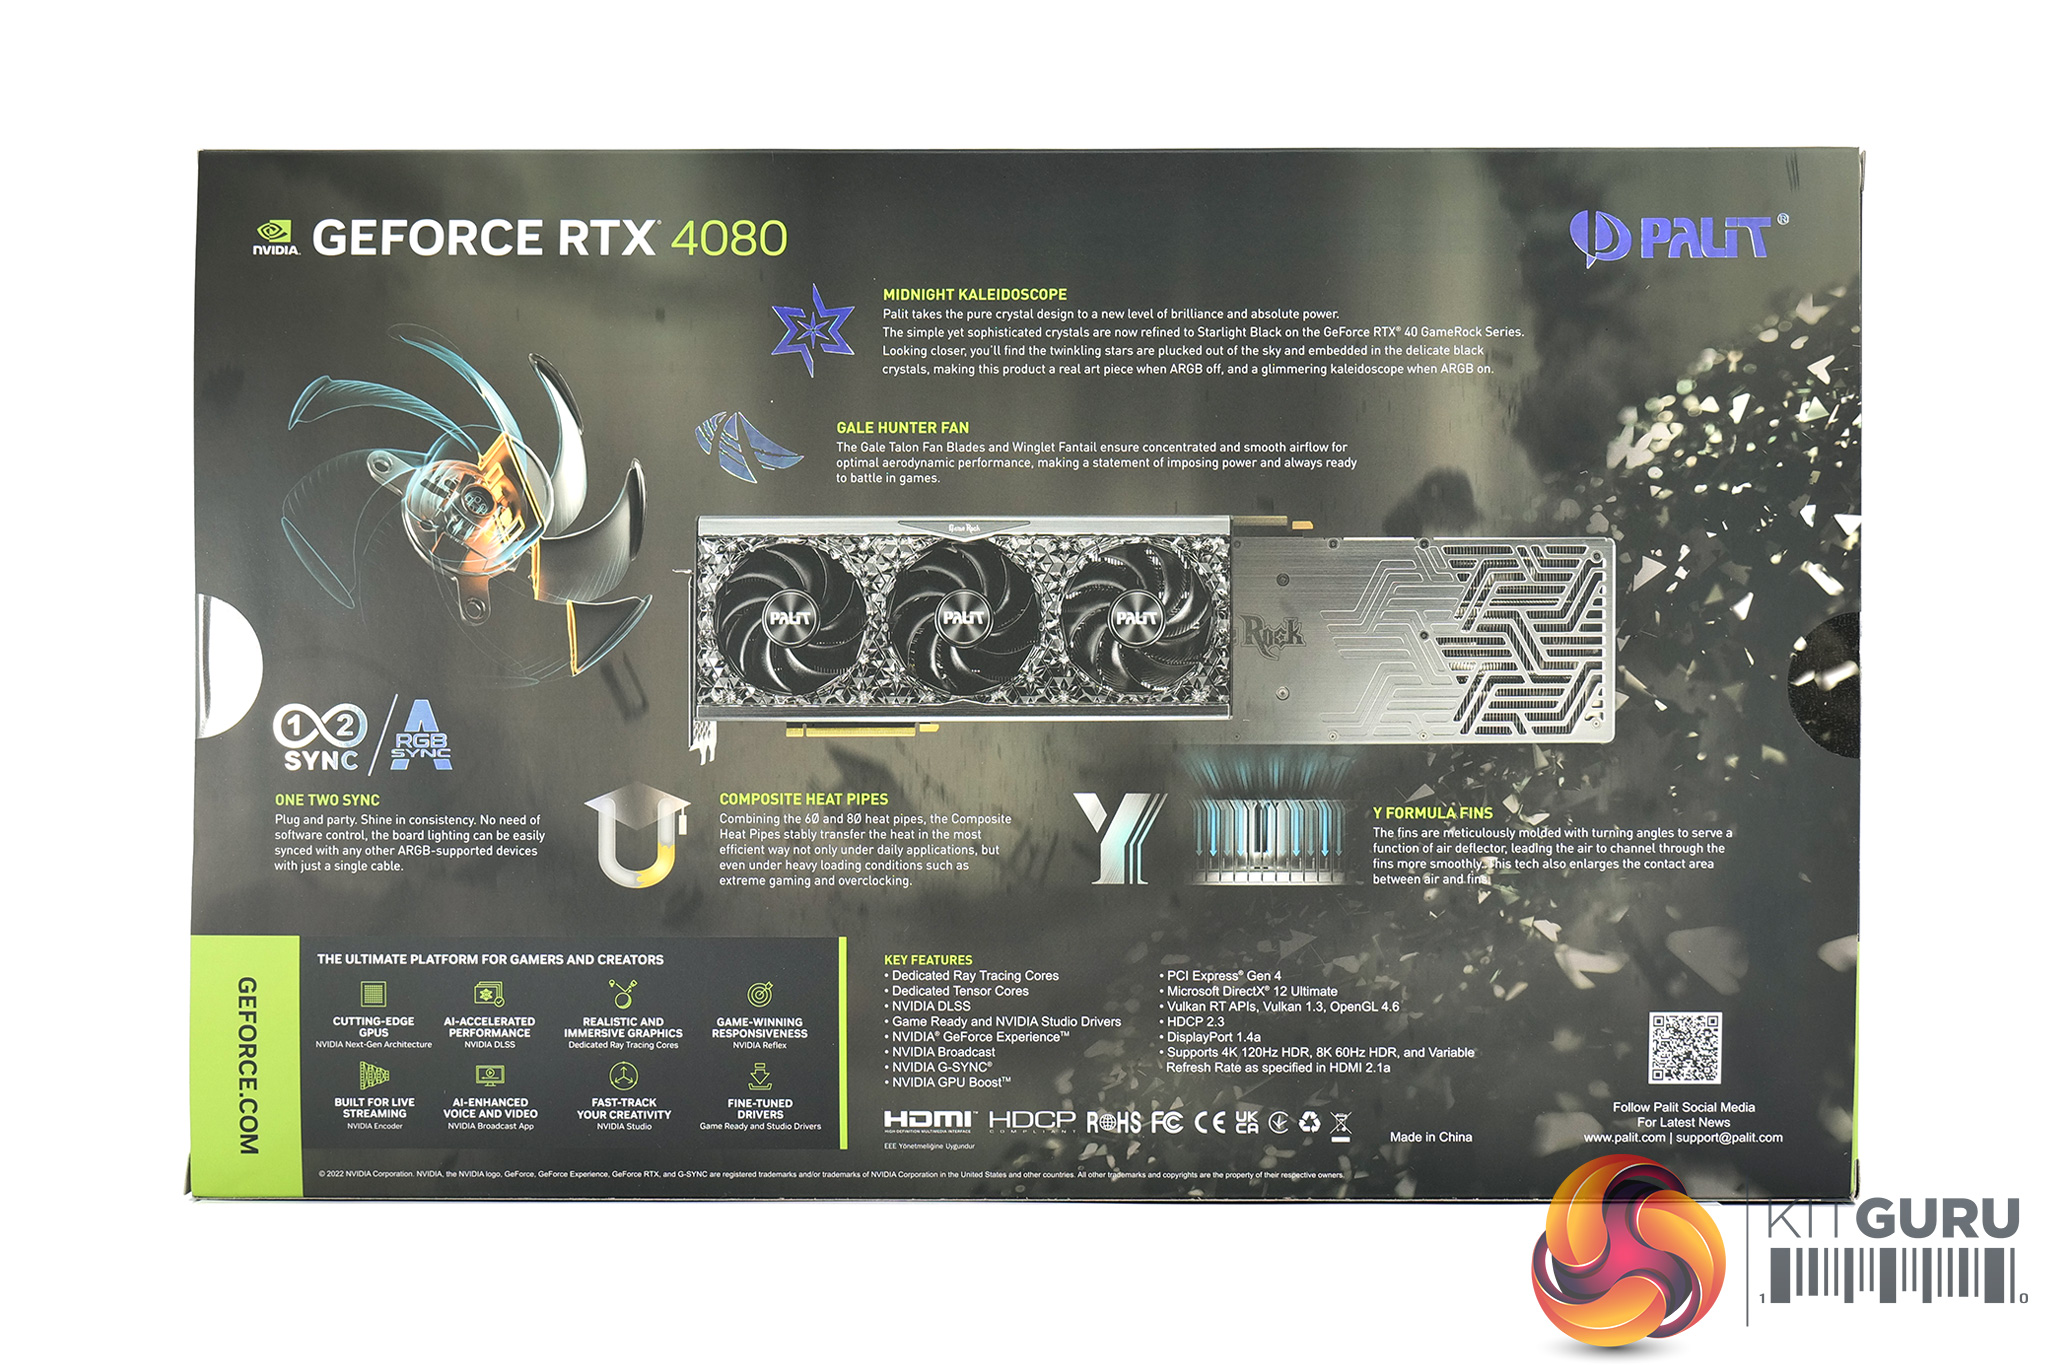 Nvidia RTX 4080 Unboxing - The Gaming Experience (Warzone 2.0